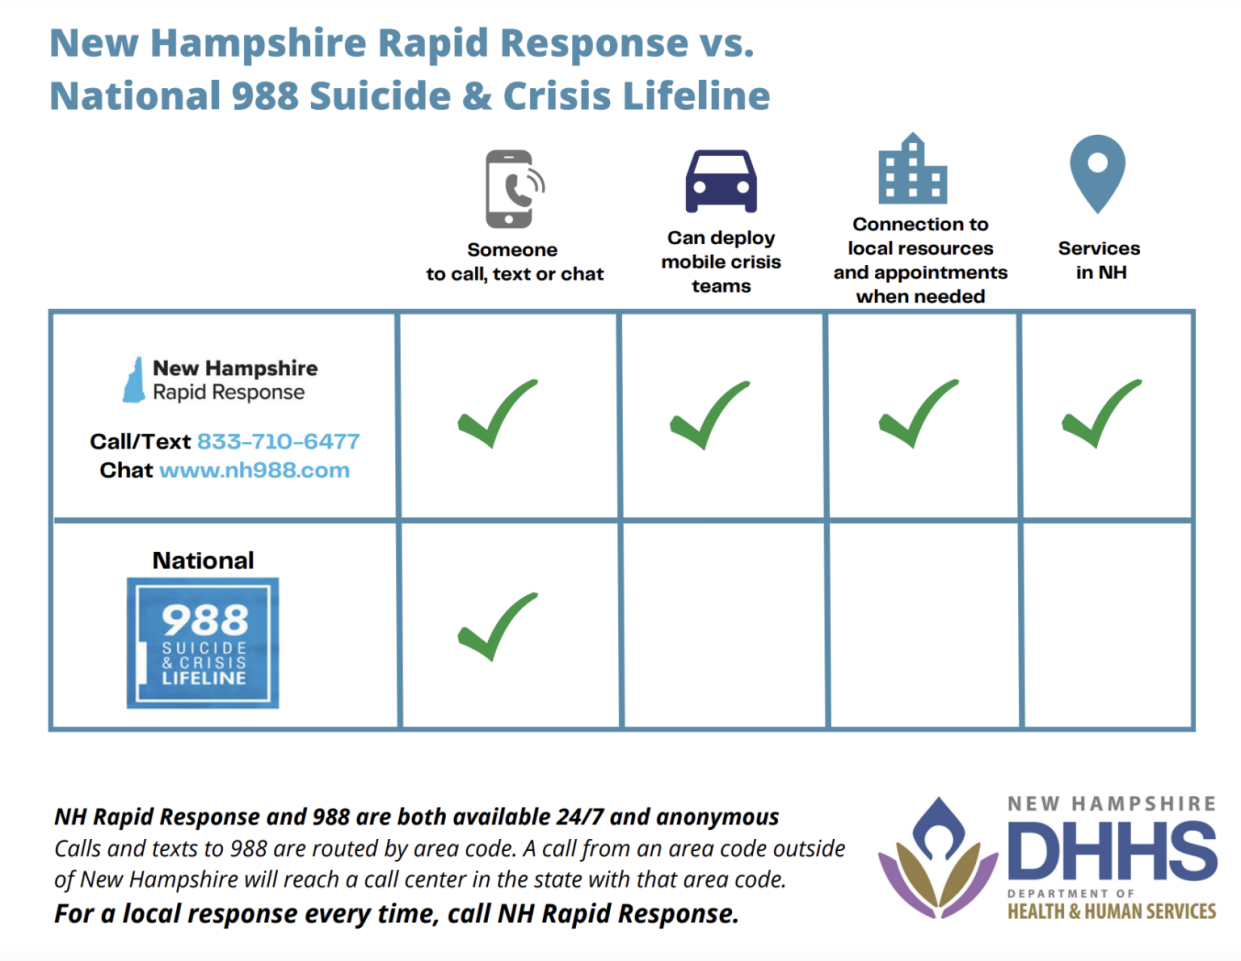 The New Hampshire Rapid Response mental health crisis hotline will remain in place after the launch of National 988 Suicide and Crisis Lifeline. For Granite Staters with out-of-state phone numbers, calling the state’s hotline directly will be the fastest way to get local help in an emergency.